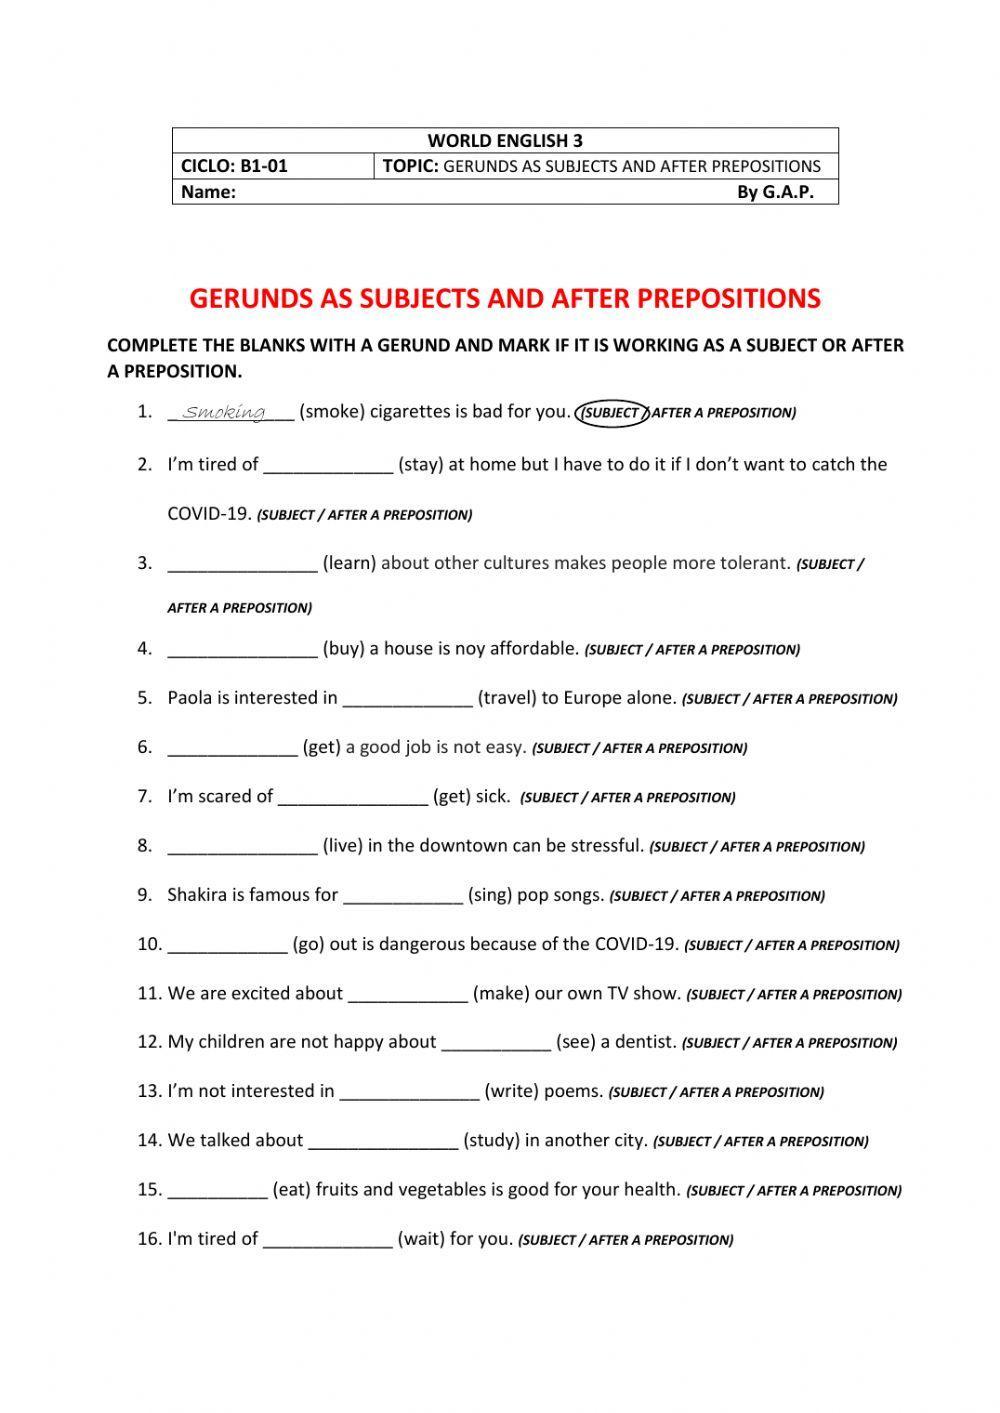 Gerunds as subjects and after prepositions